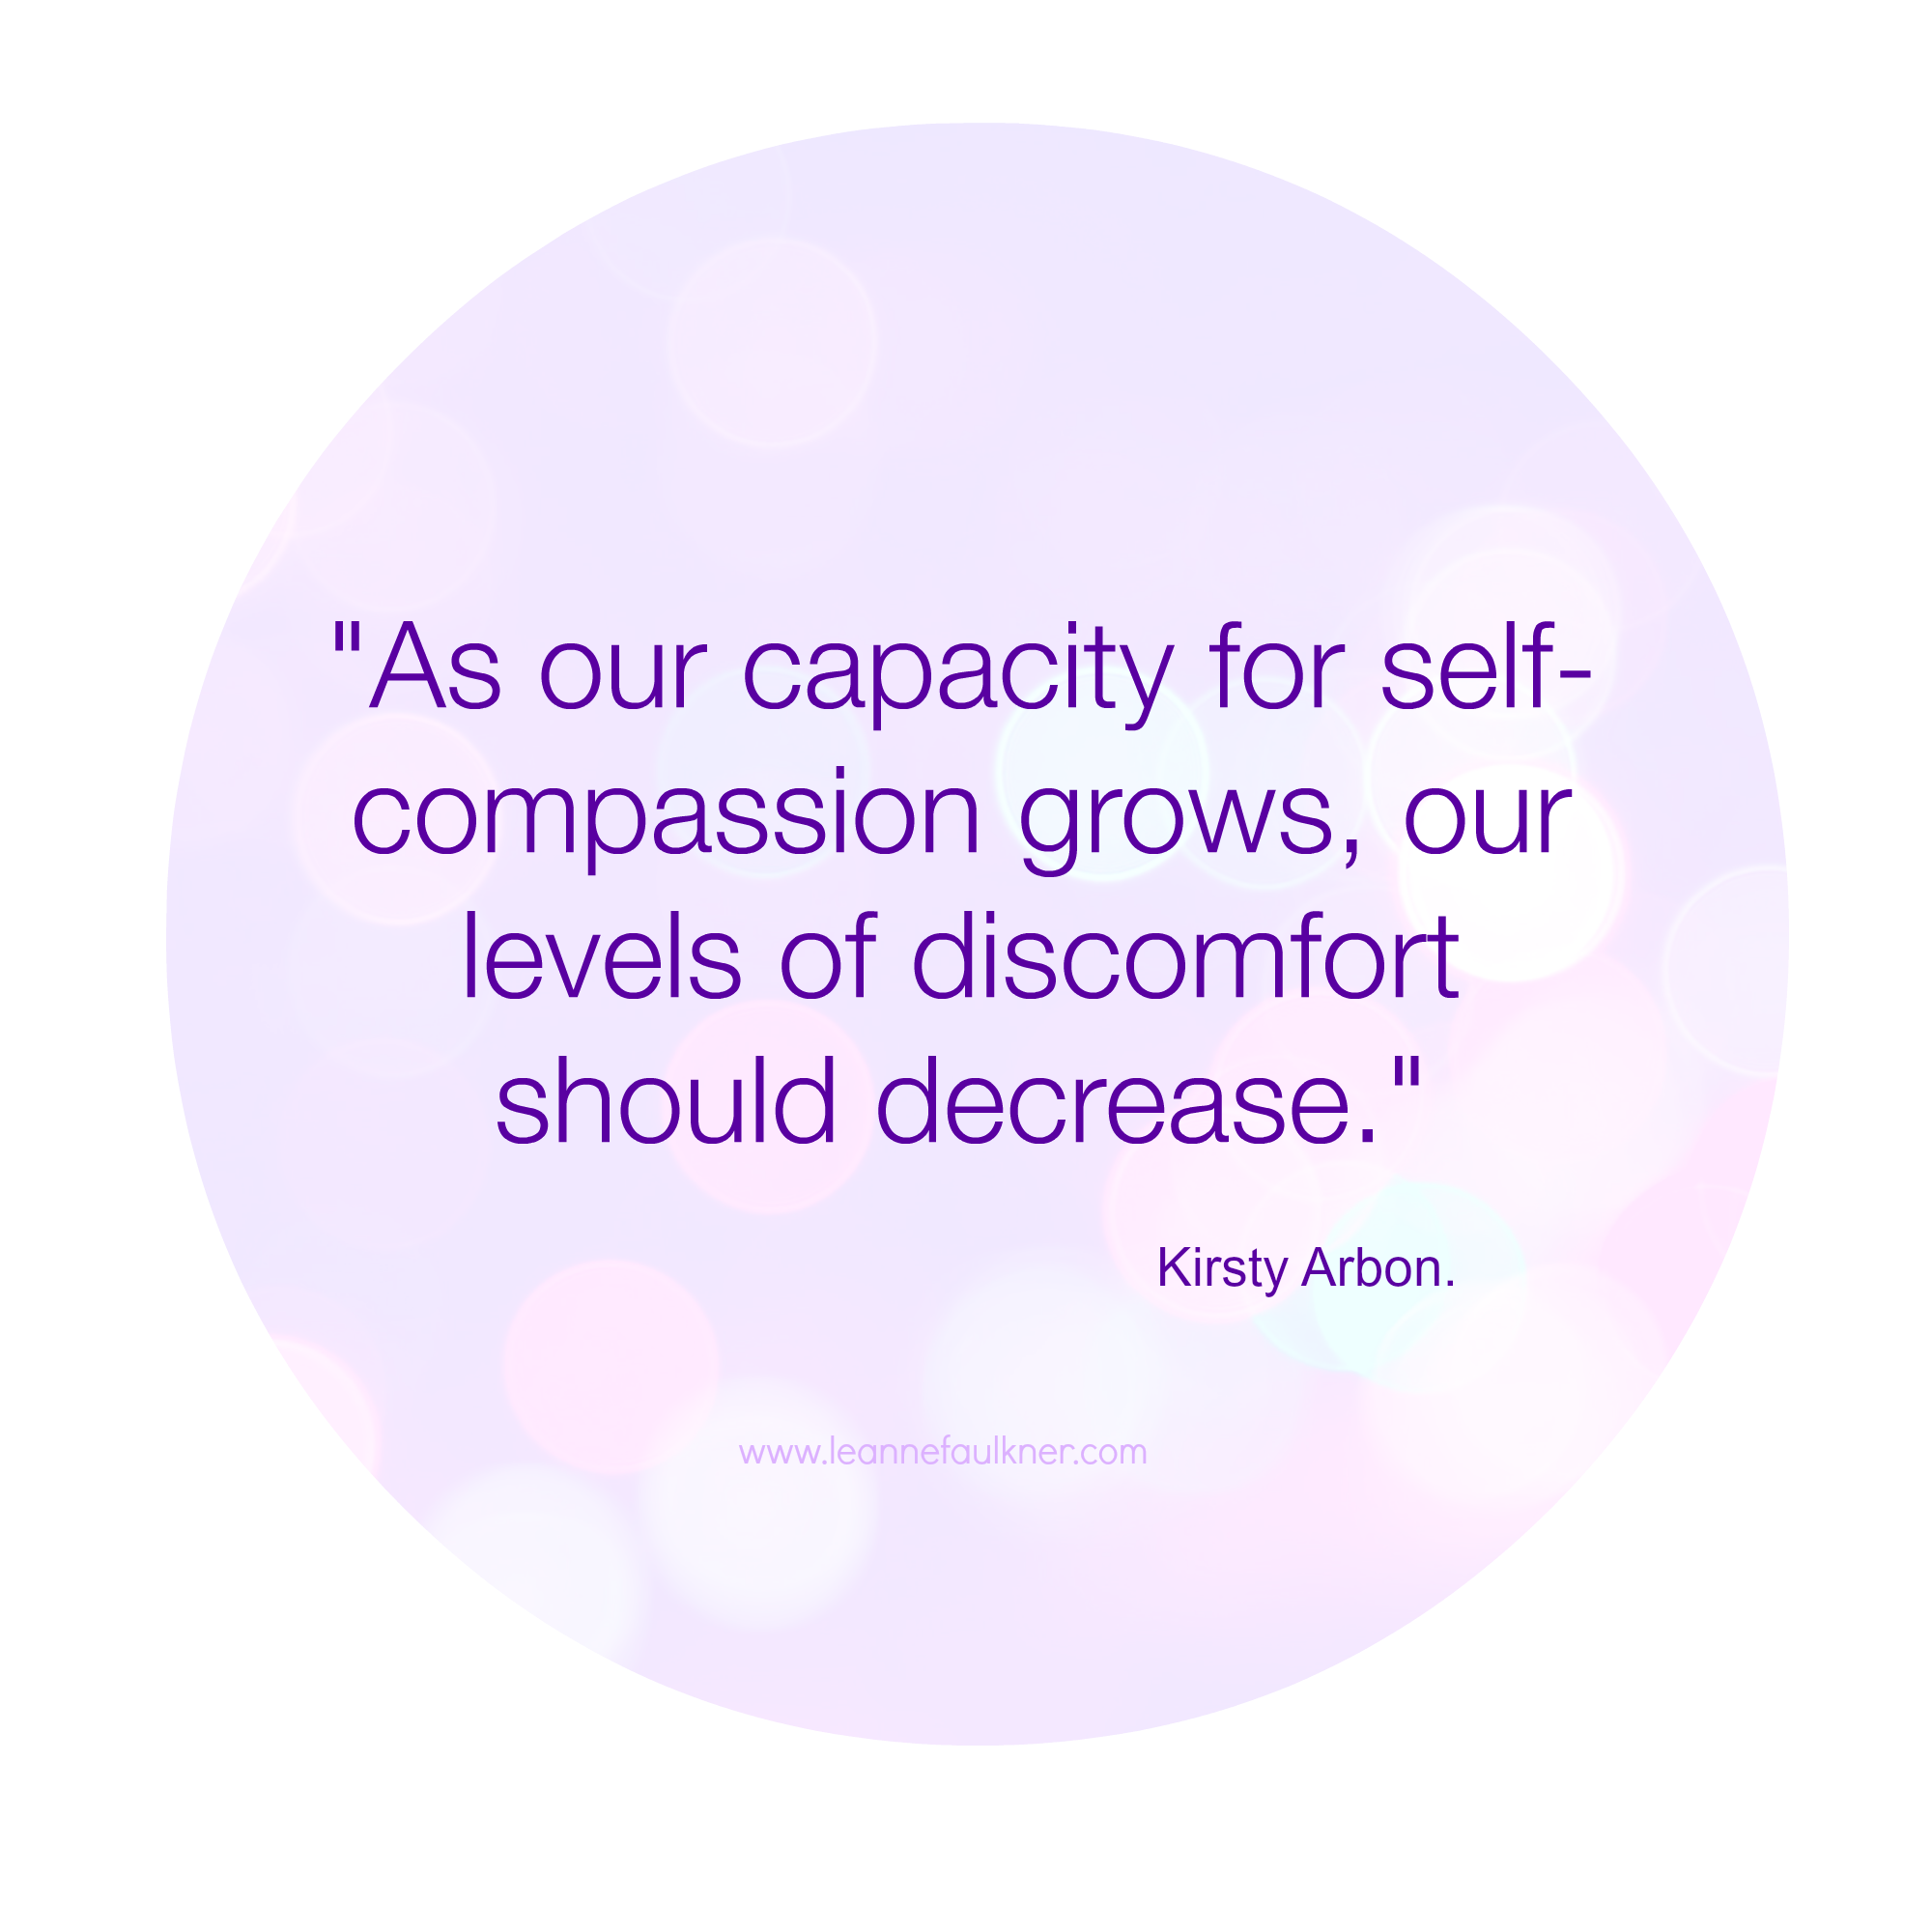 self-compassion helps reduce self loathing